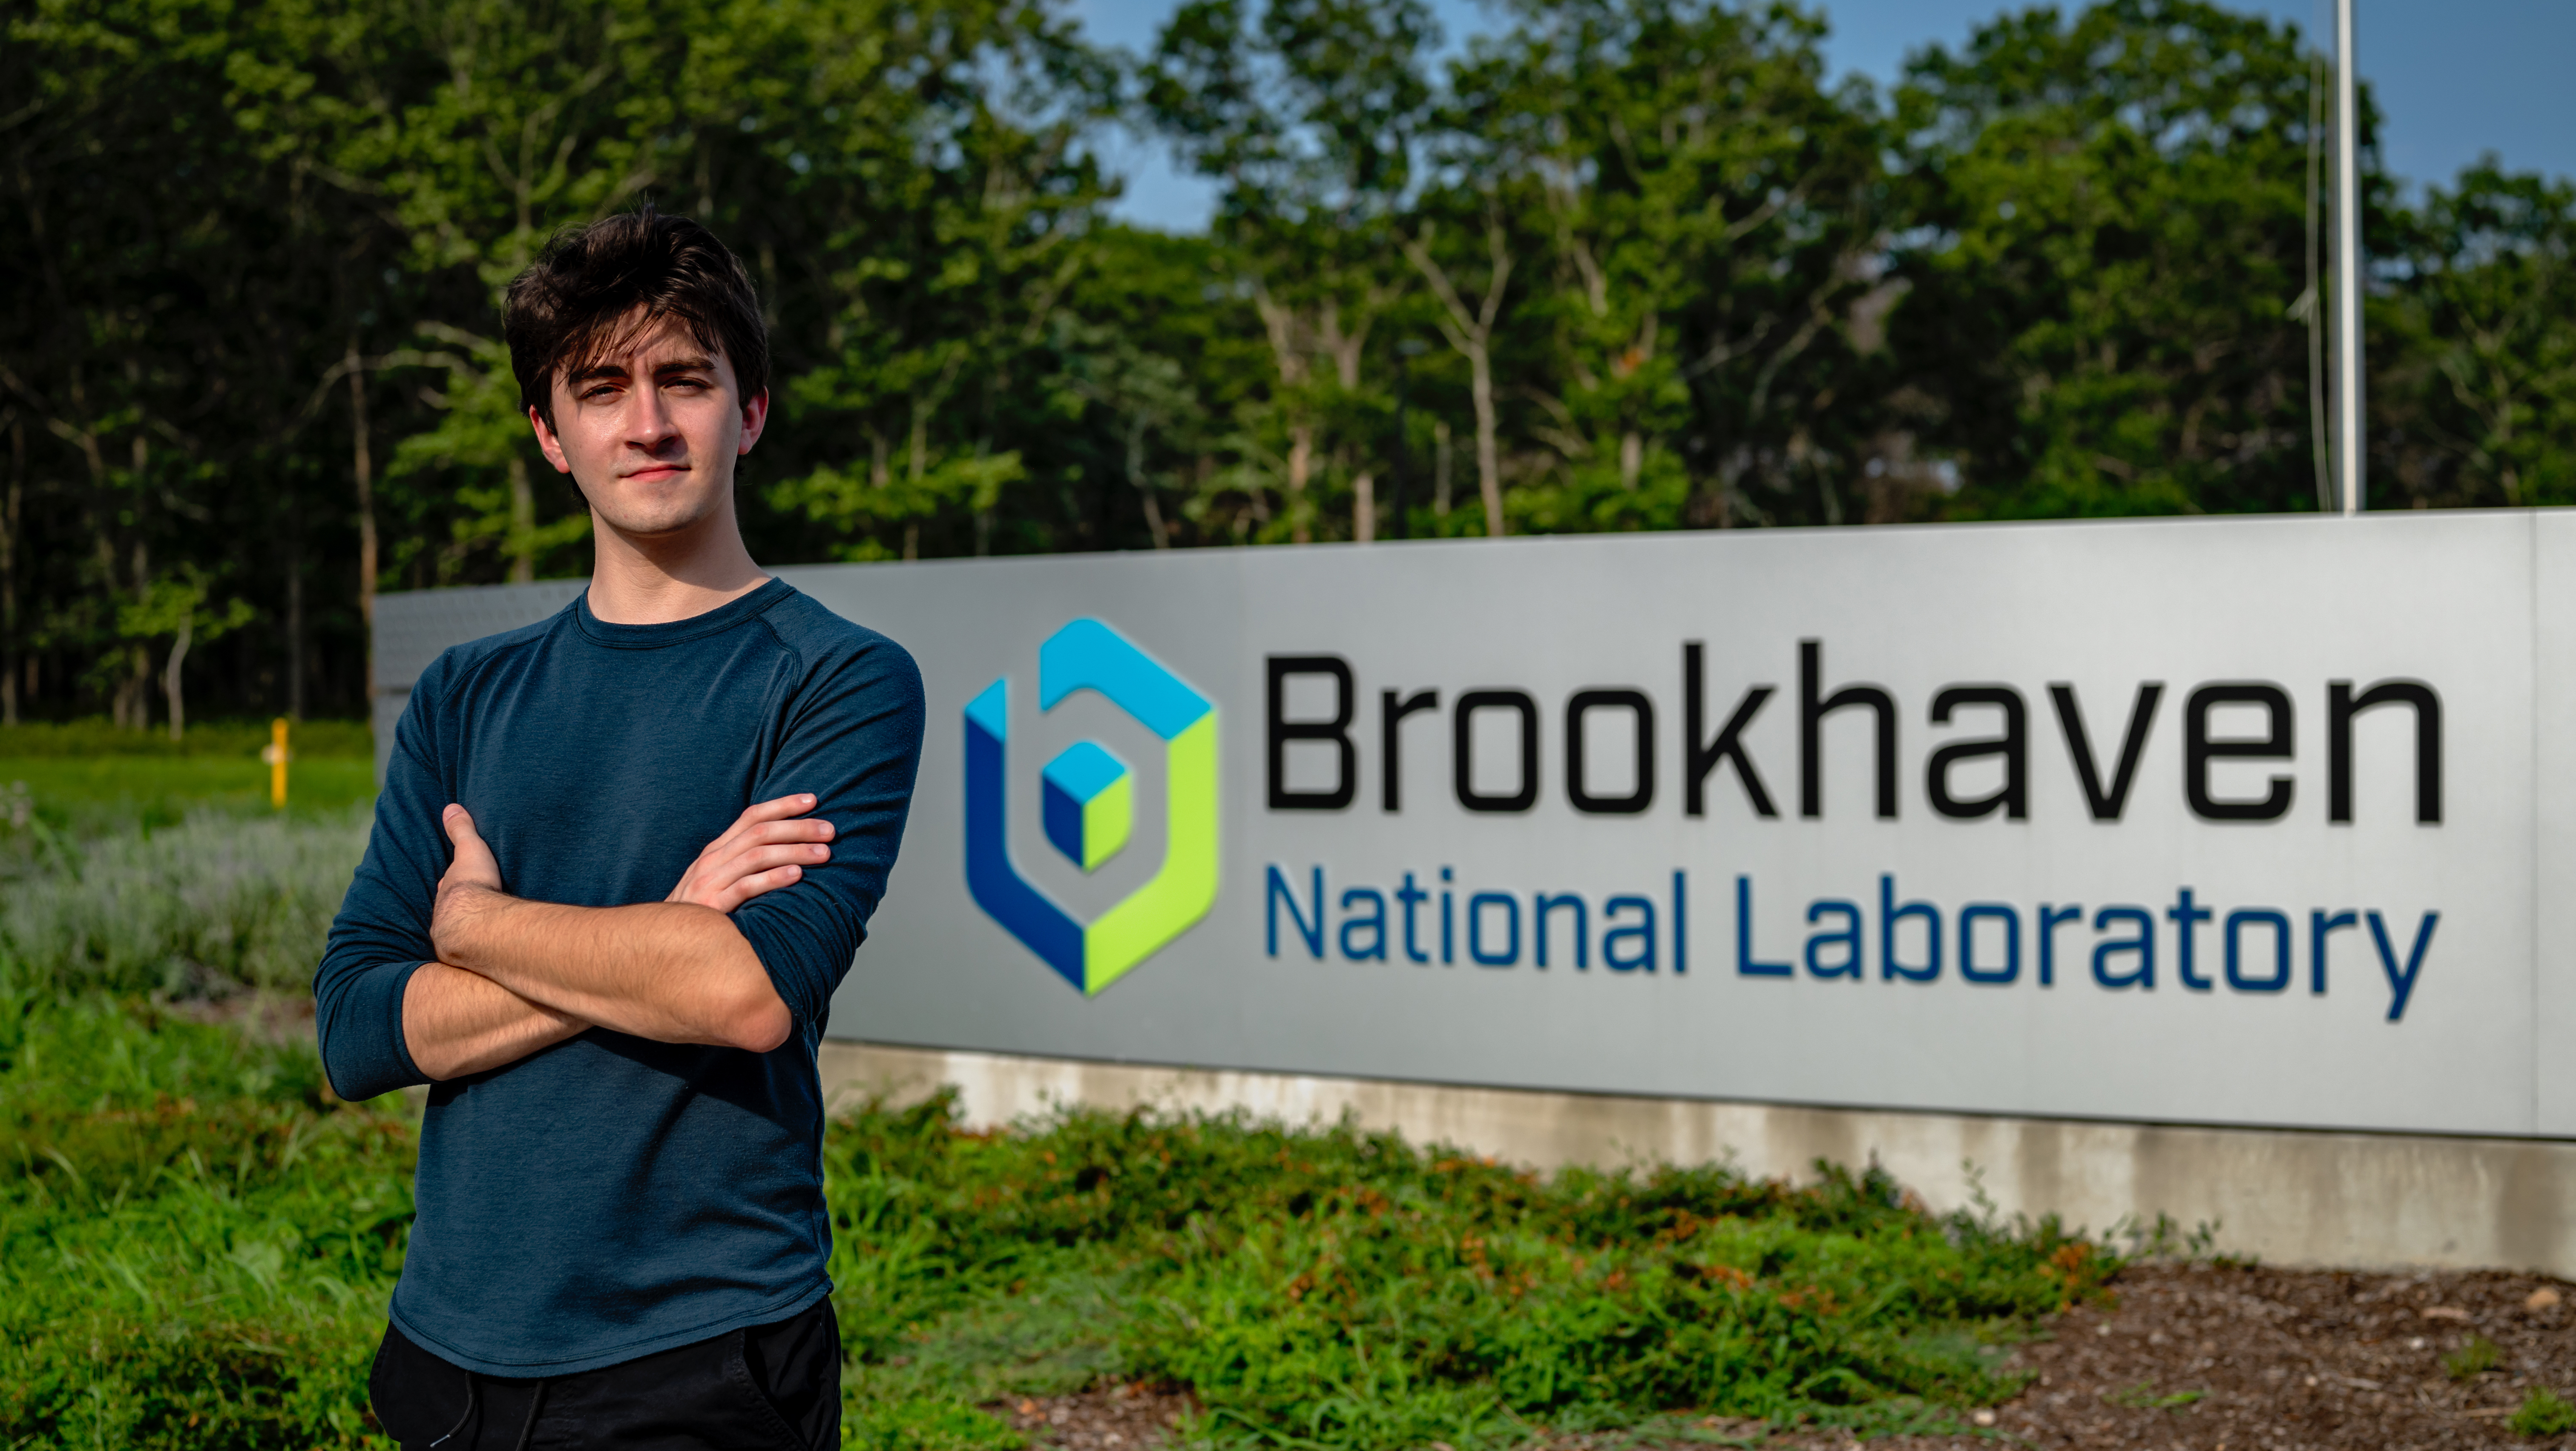 Adelphi Student Researches Molecule at NY's Brookhaven National Laboratory